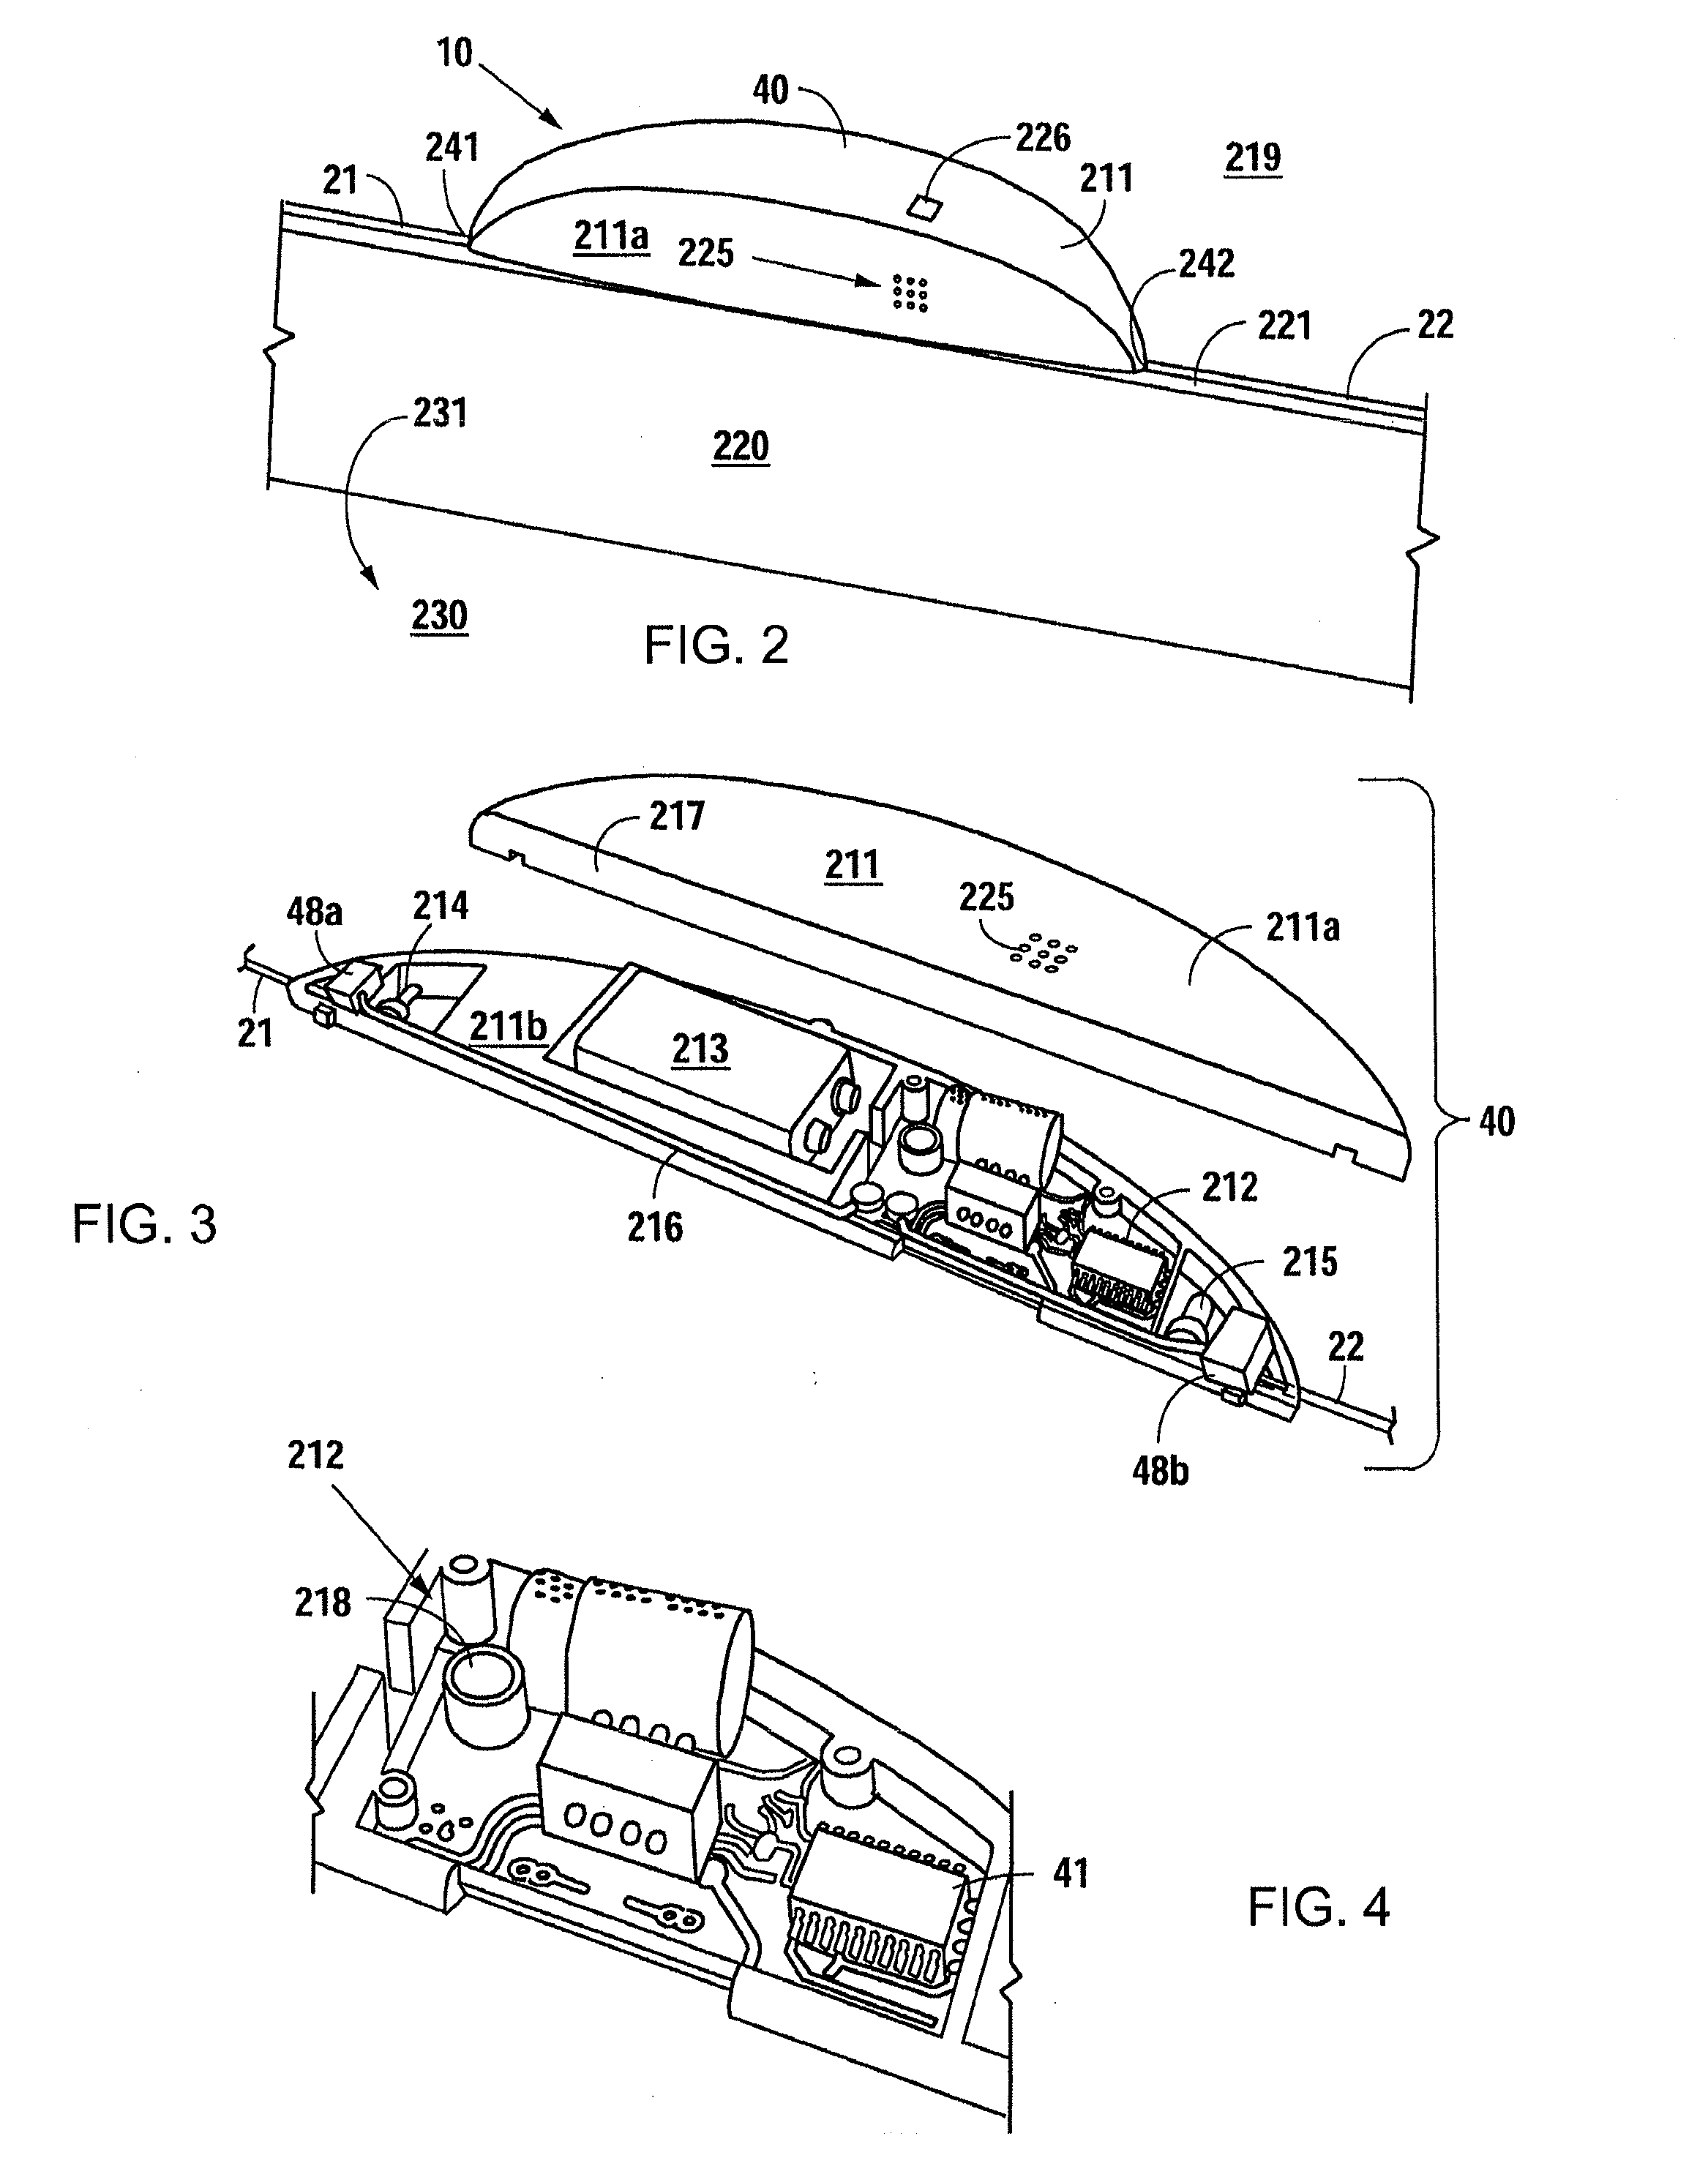 Emergency Exit Route Illumination System and Methods